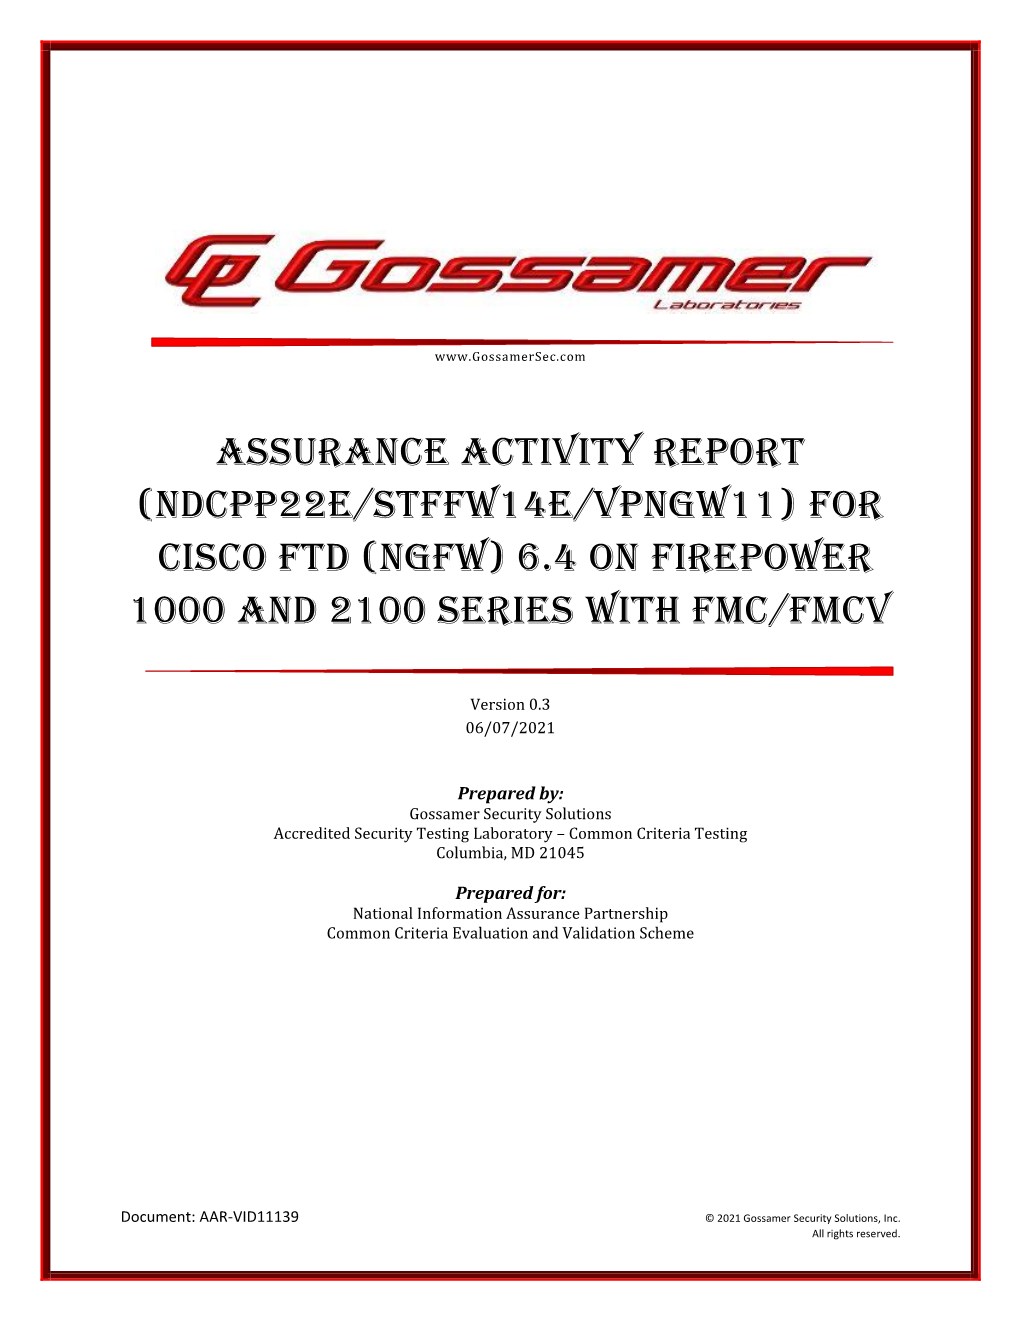 Assurance Activity Report (Ndcpp22e/Stffw14e/VPNGW11) for Cisco FTD (NGFW) 6.4 on Firepower 1000 and 2100 Series with FMC/Fmcv